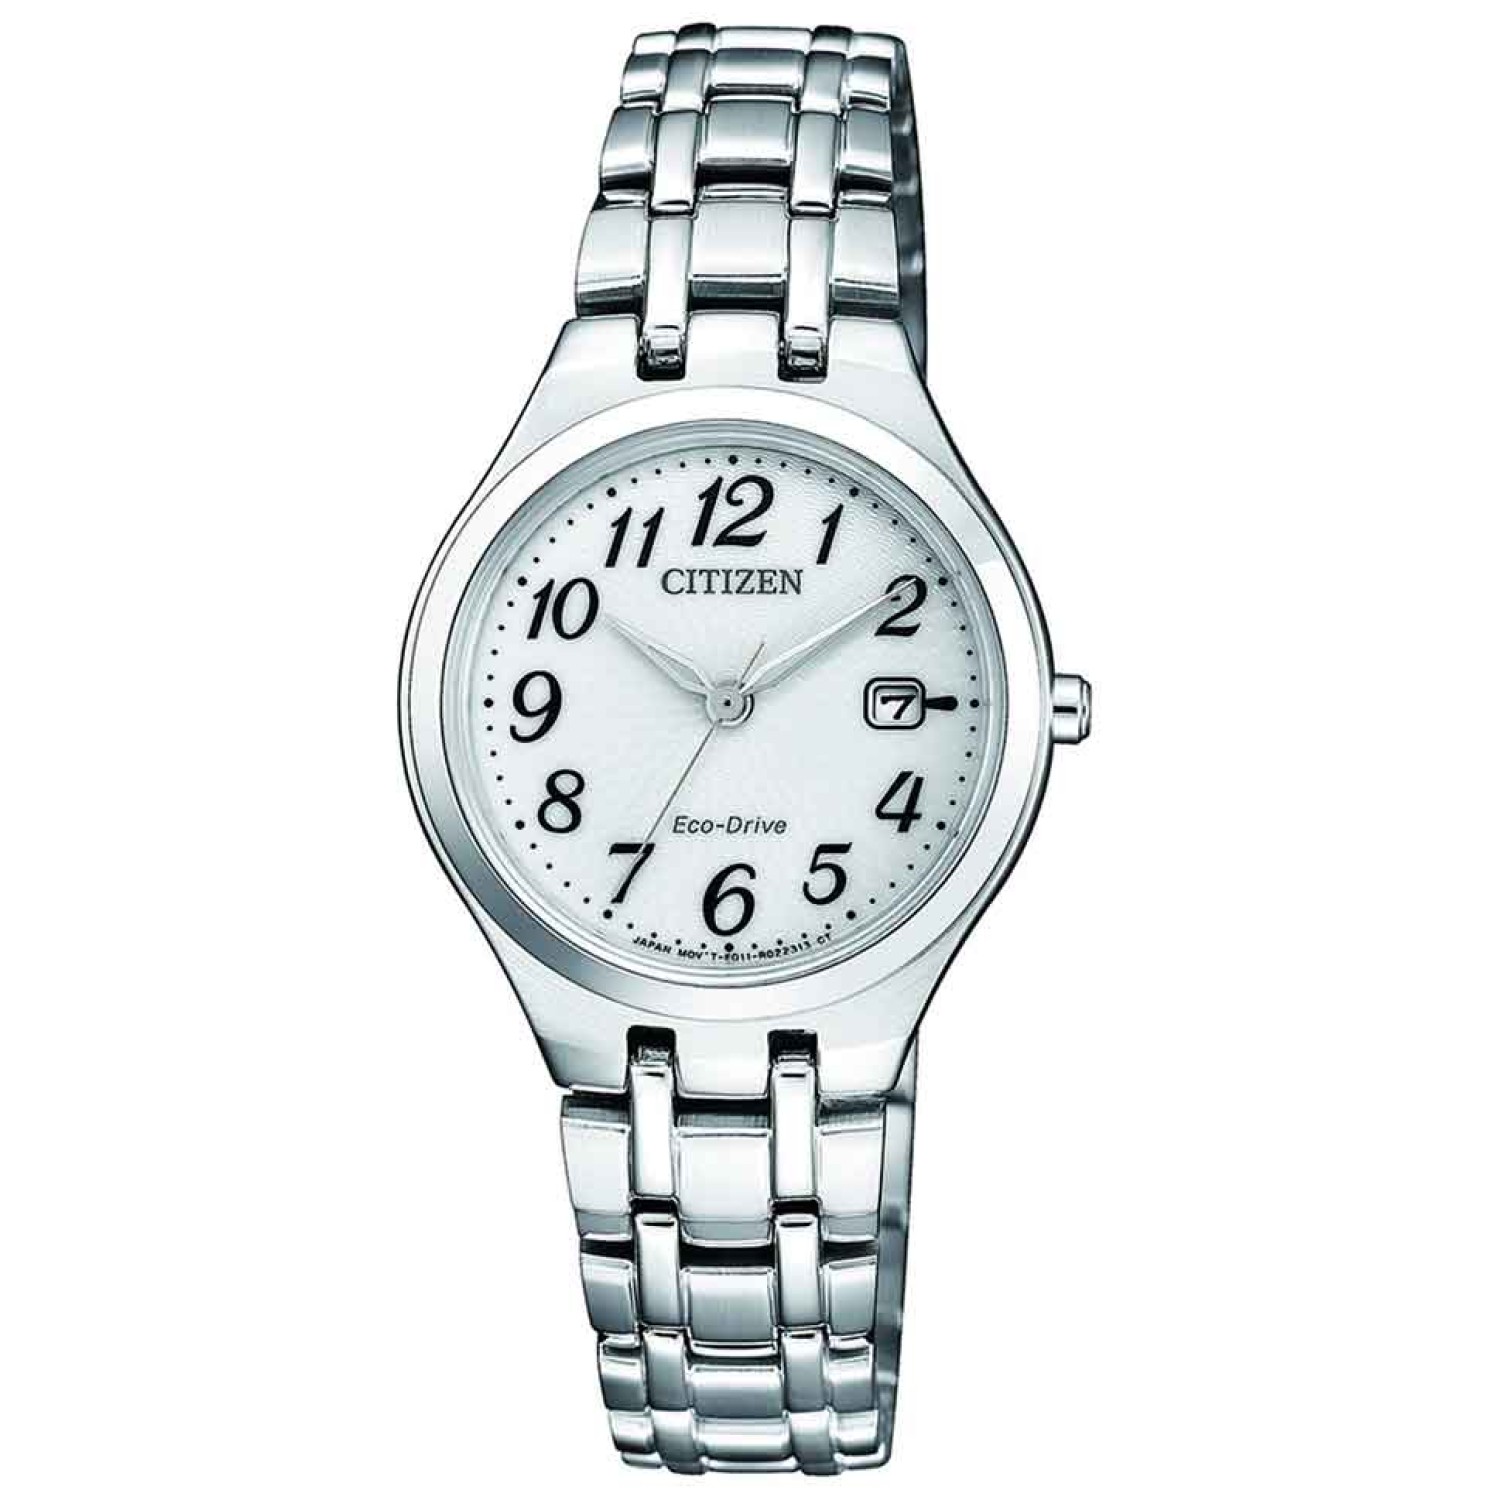 EW2480-83A Citizen Ladies Eco-drive Bi-tone Watch. Citizen Ladies EW2480-83A Eco-drive Stainless Steel water resistant watch LAYBUY - Pay it easy, in 6 weekly payments and have it now. Only pay the price of your purchase, when you pay your instalments on 